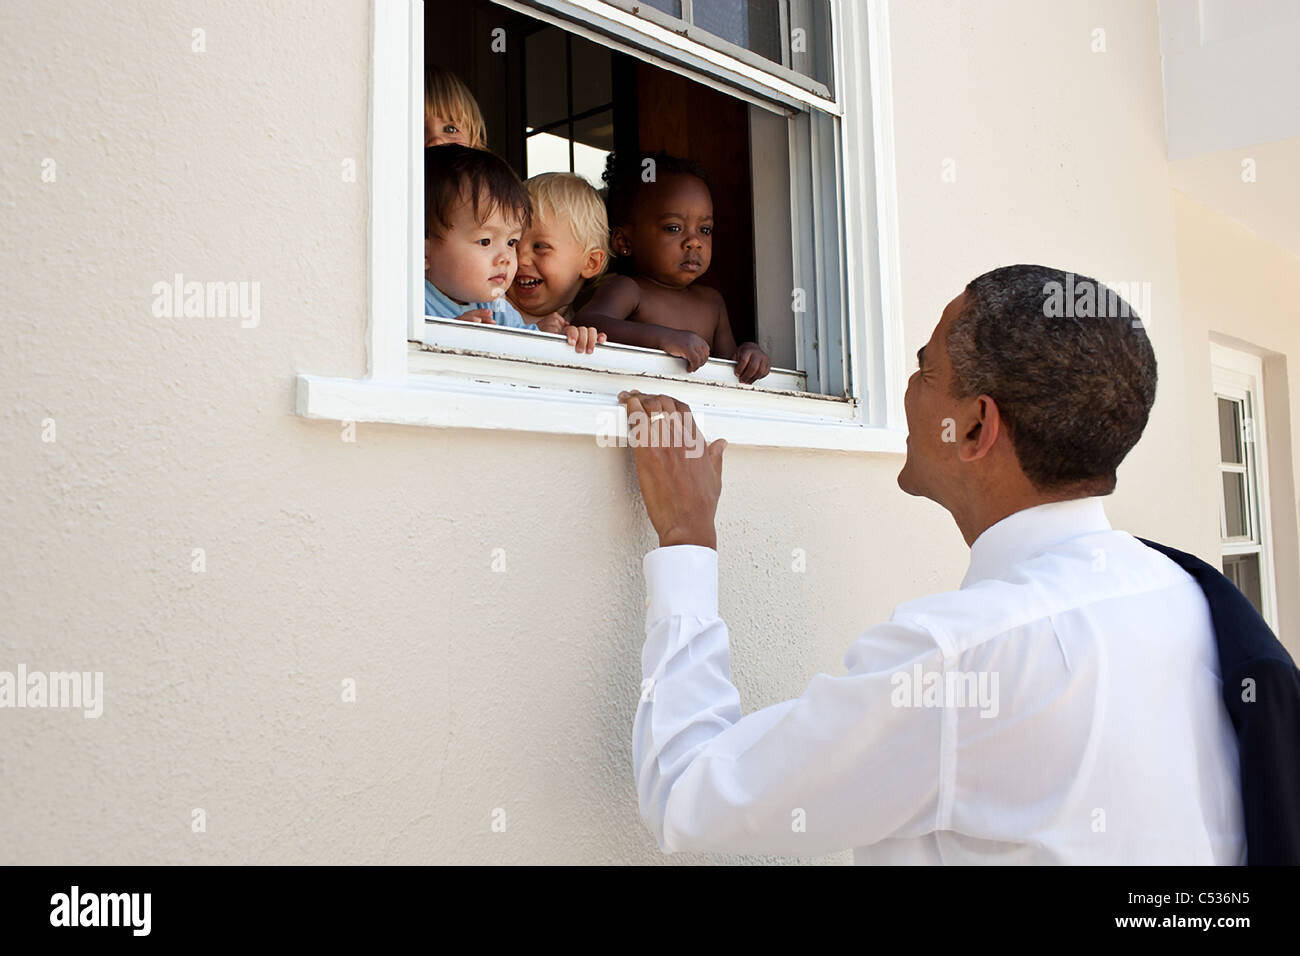 President Barack Obama greets children at a day care facility adjacent to daughter Sasha's school in Bethesda, Md Stock Photo